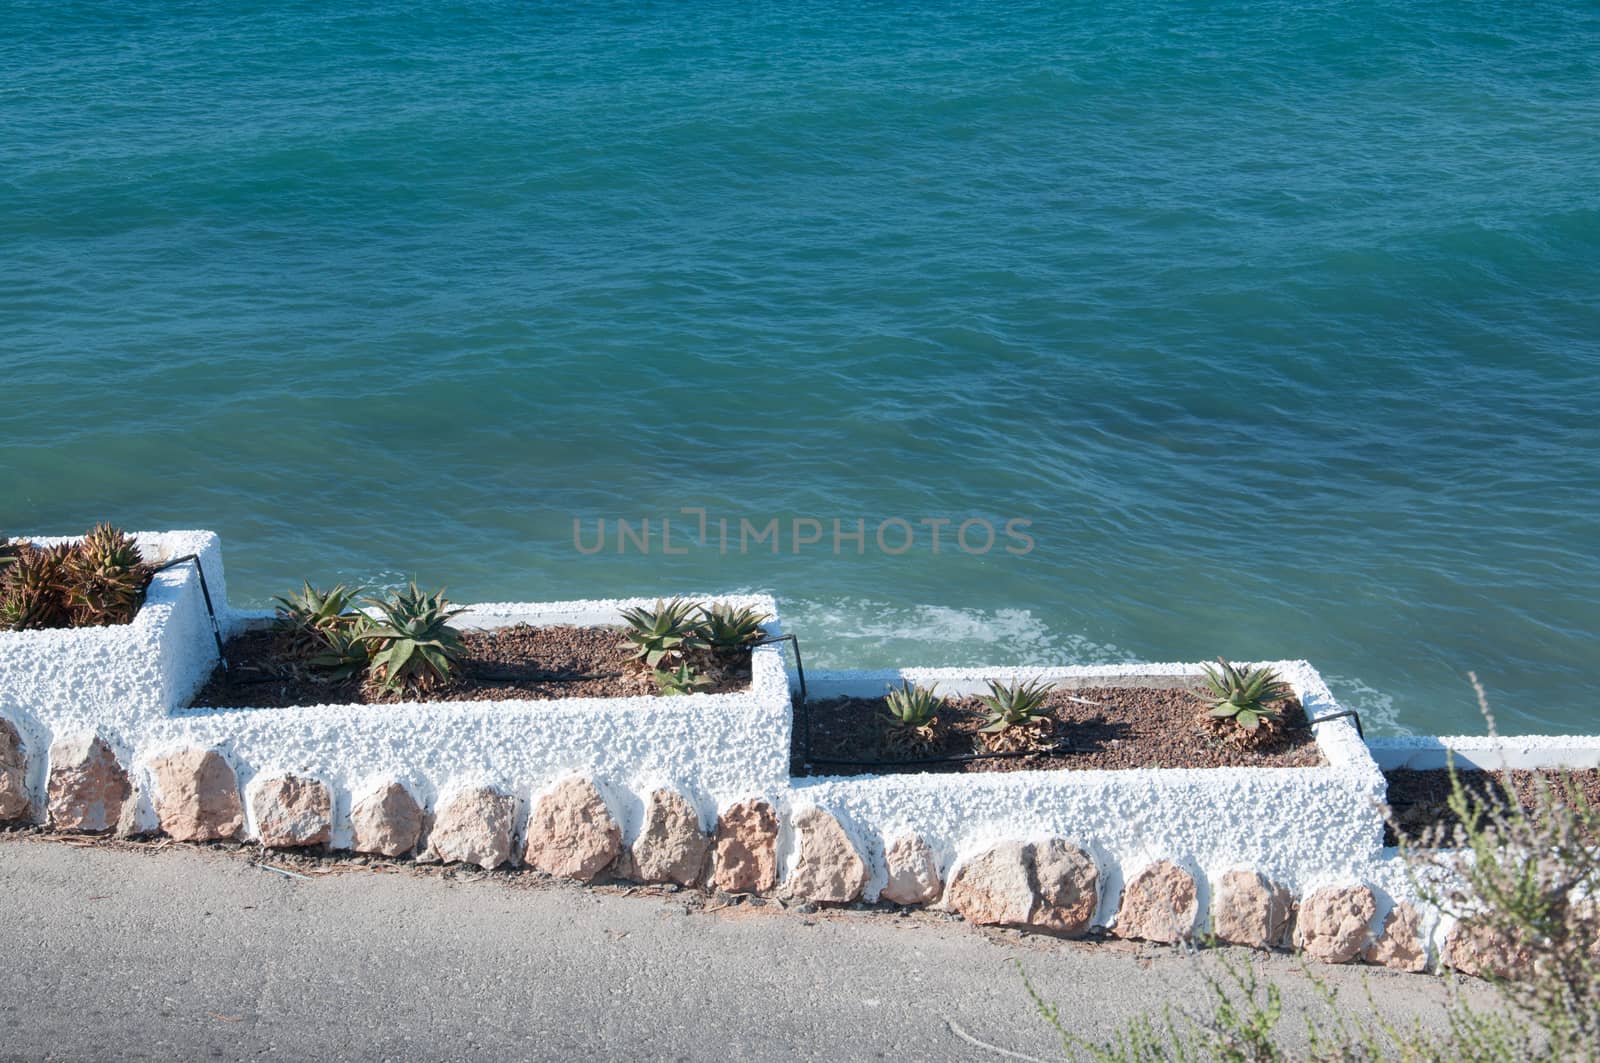 Planting pots on a walking path by the Mediterranean sea.